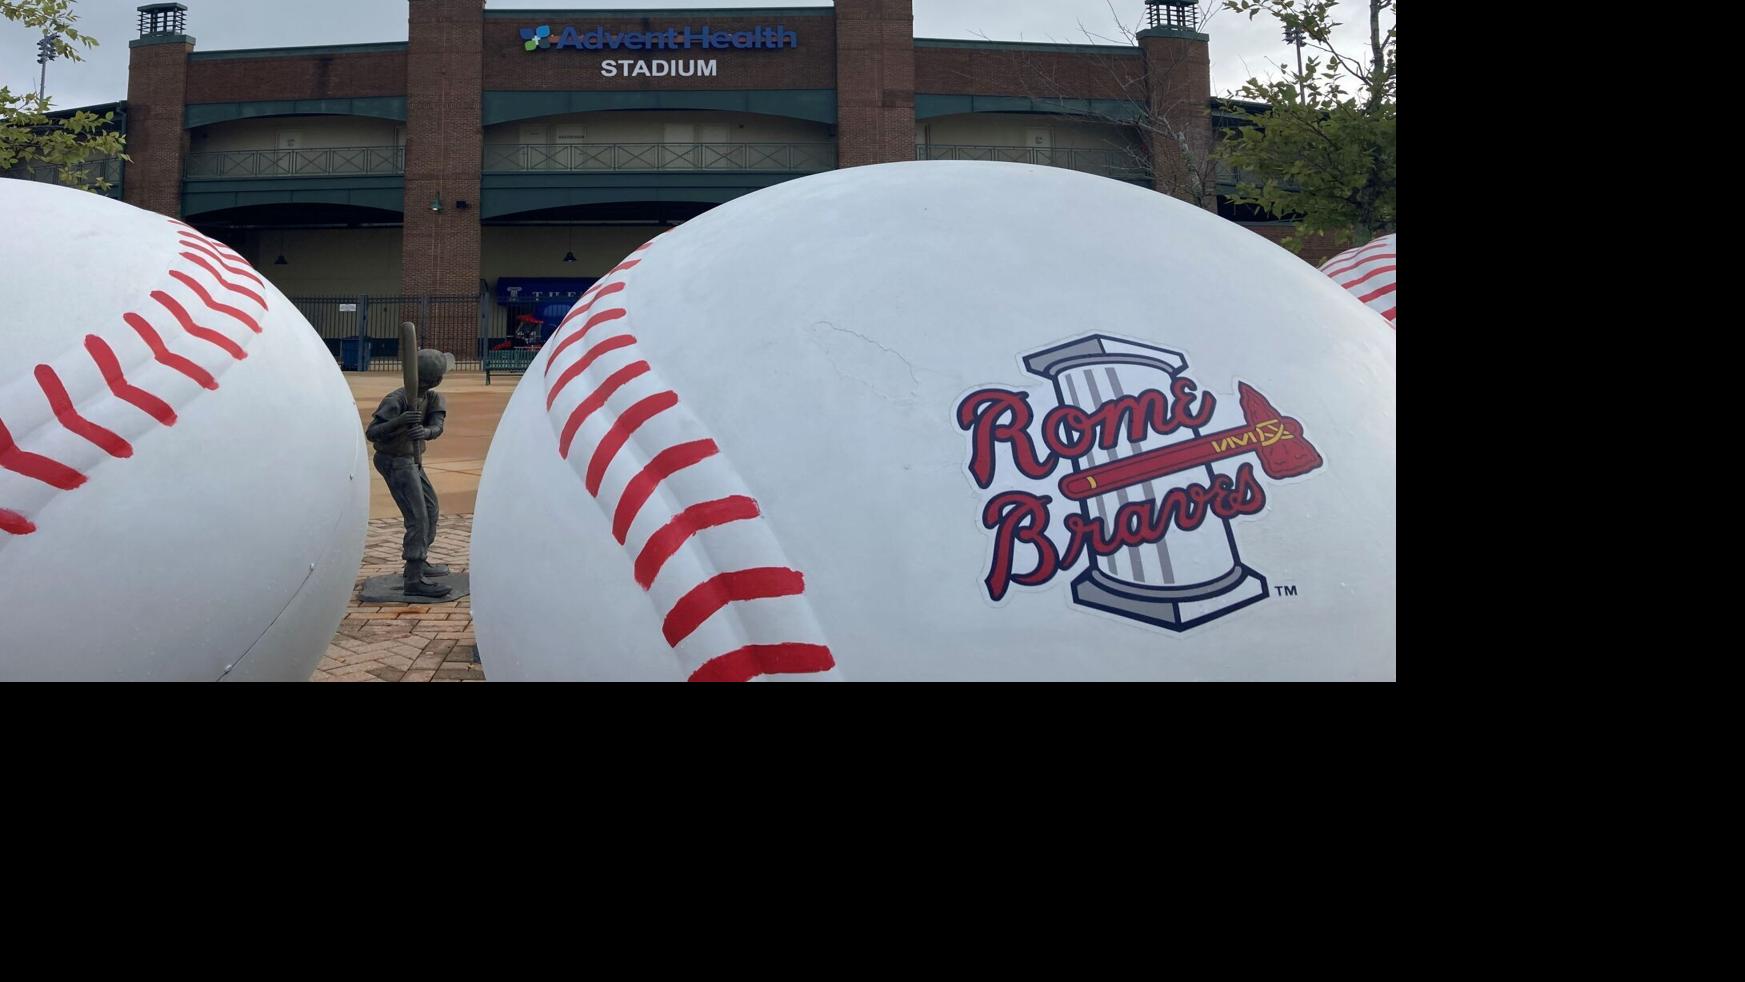 Name change in store for the Rome Braves as team seeks community